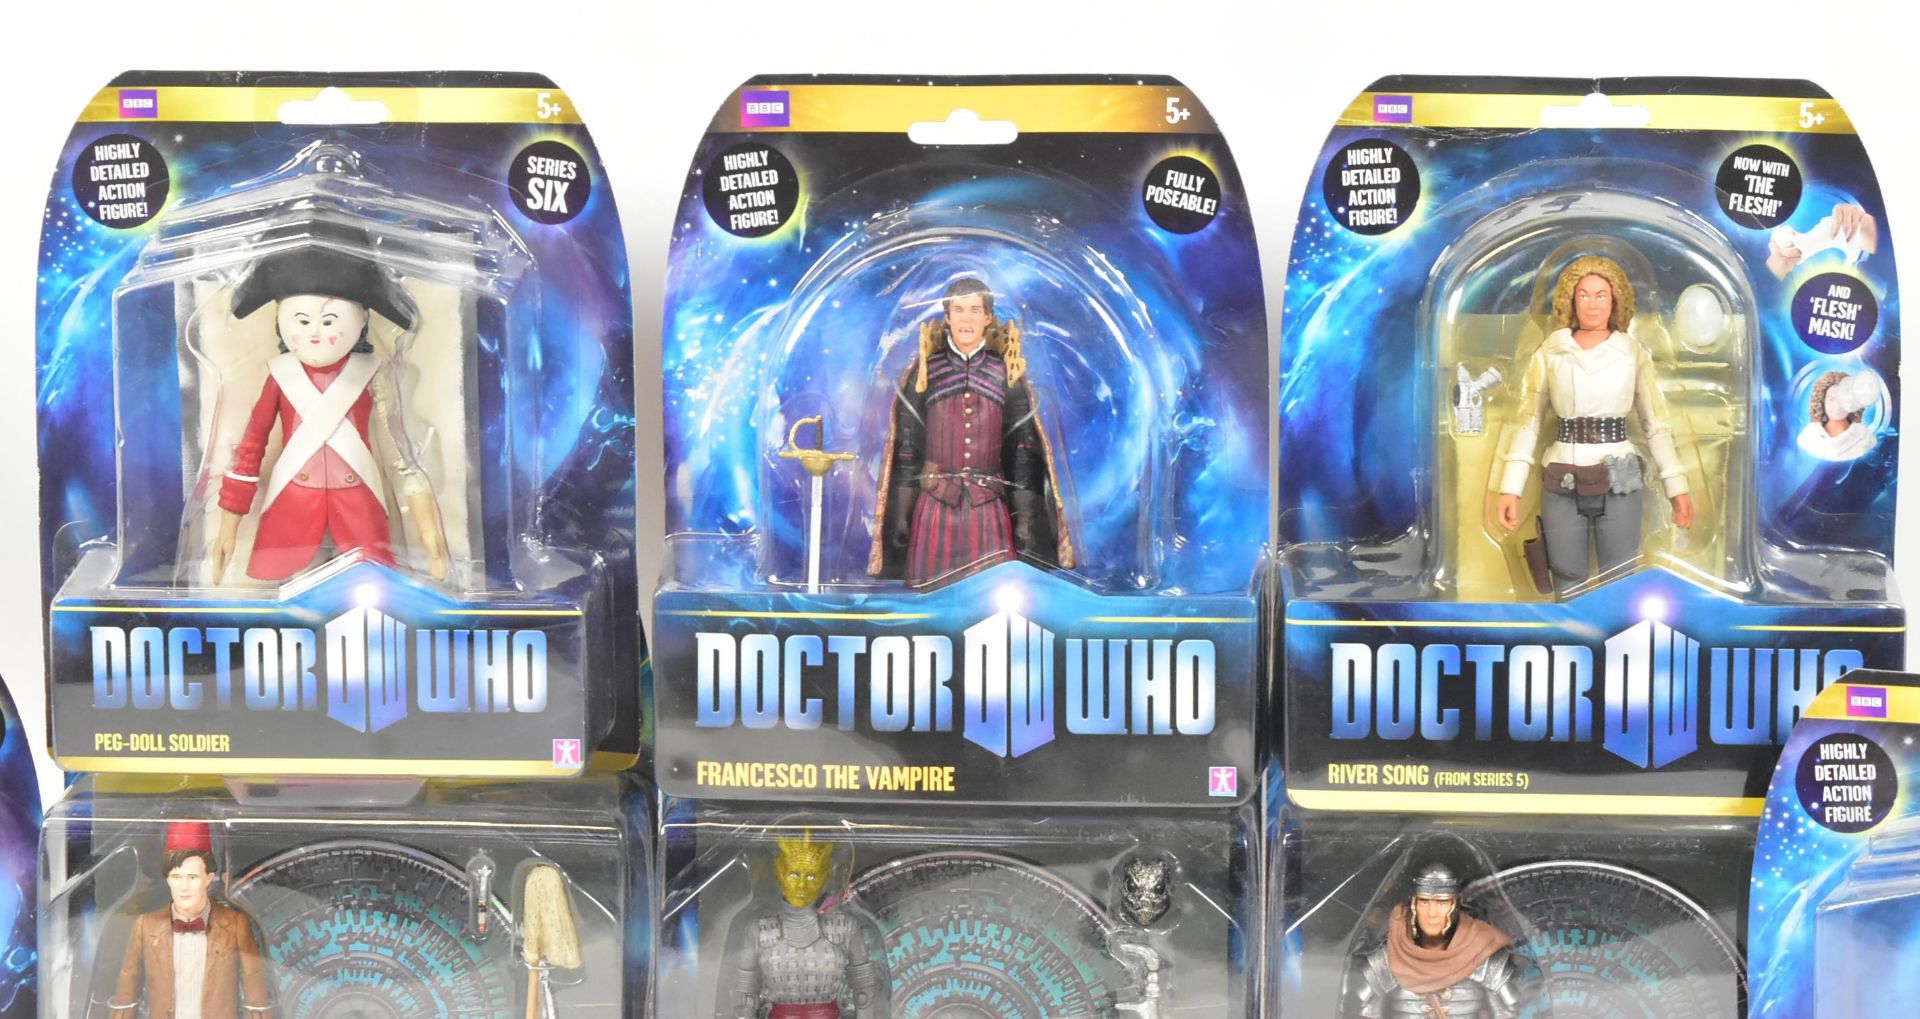 DOCTOR WHO - CHARACTER OPTIONS - CARDED ACTION FIGURES - Image 3 of 5